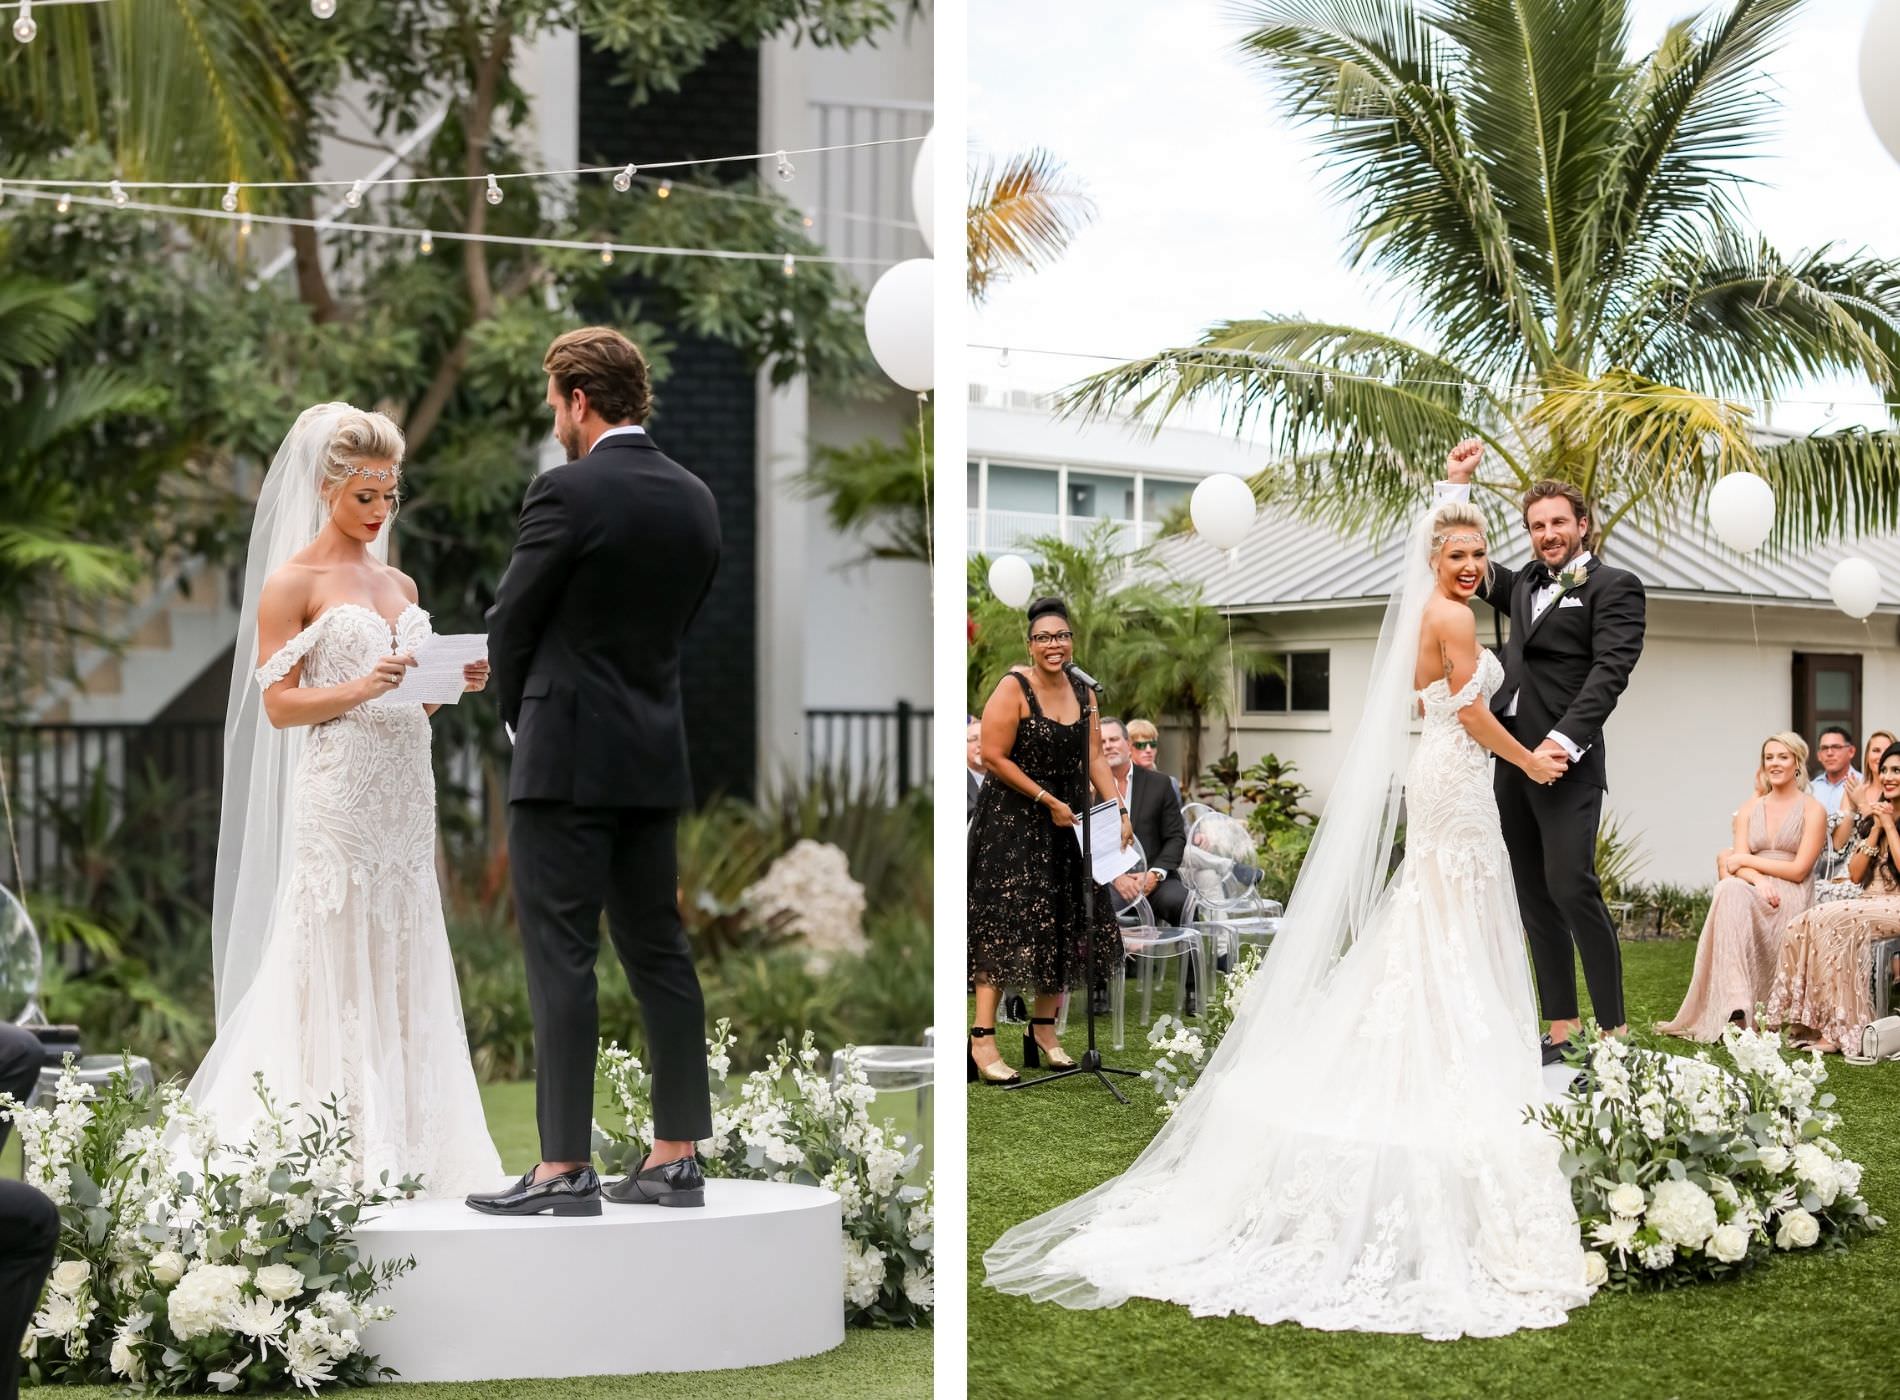 Florida Bride and Groom Vow Exchange on Custom Built Wedding Stage, Surrounded by Family and Friends on Acrylic Ghost Chairs, Tropical Elegant Inspired Floral Arrangements with Whtie and Ivory Flowers with Greenery | Sarasota Wedding Planner Kelly Kennedy Weddings | Florida Wedding Photographer Lifelong Photography Studio